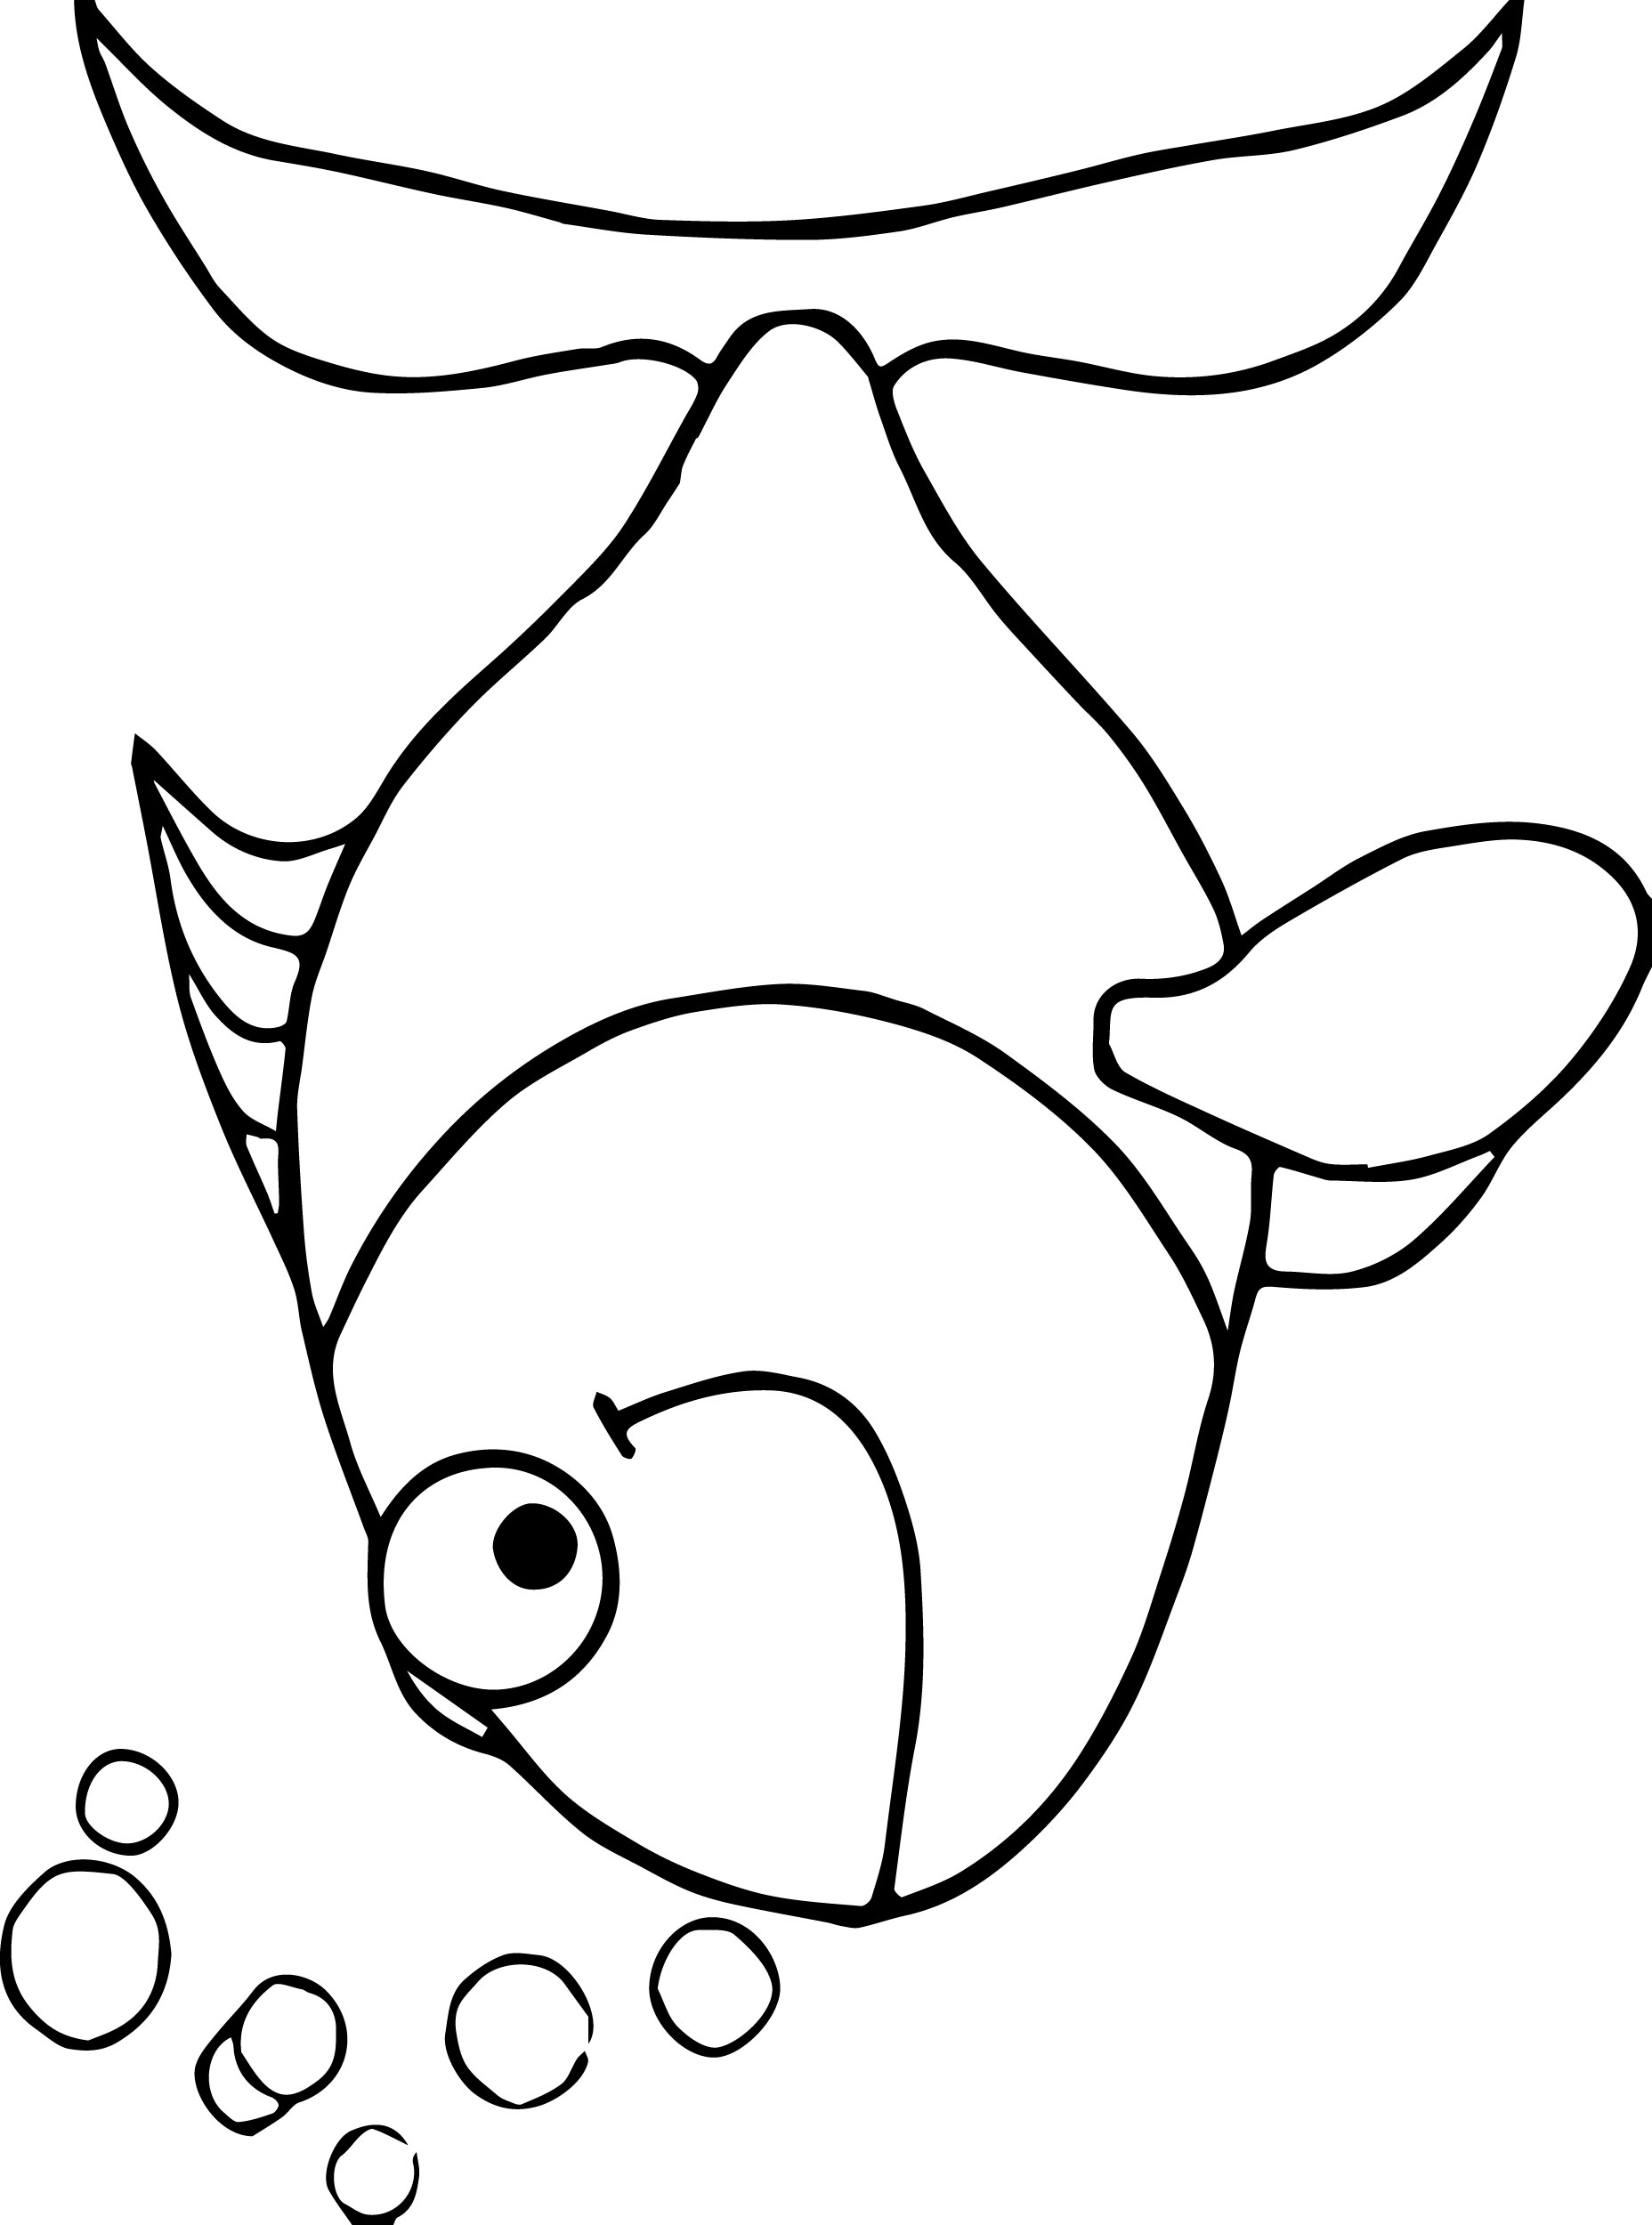 Fish Coloring Pages - Pluscoloring.com